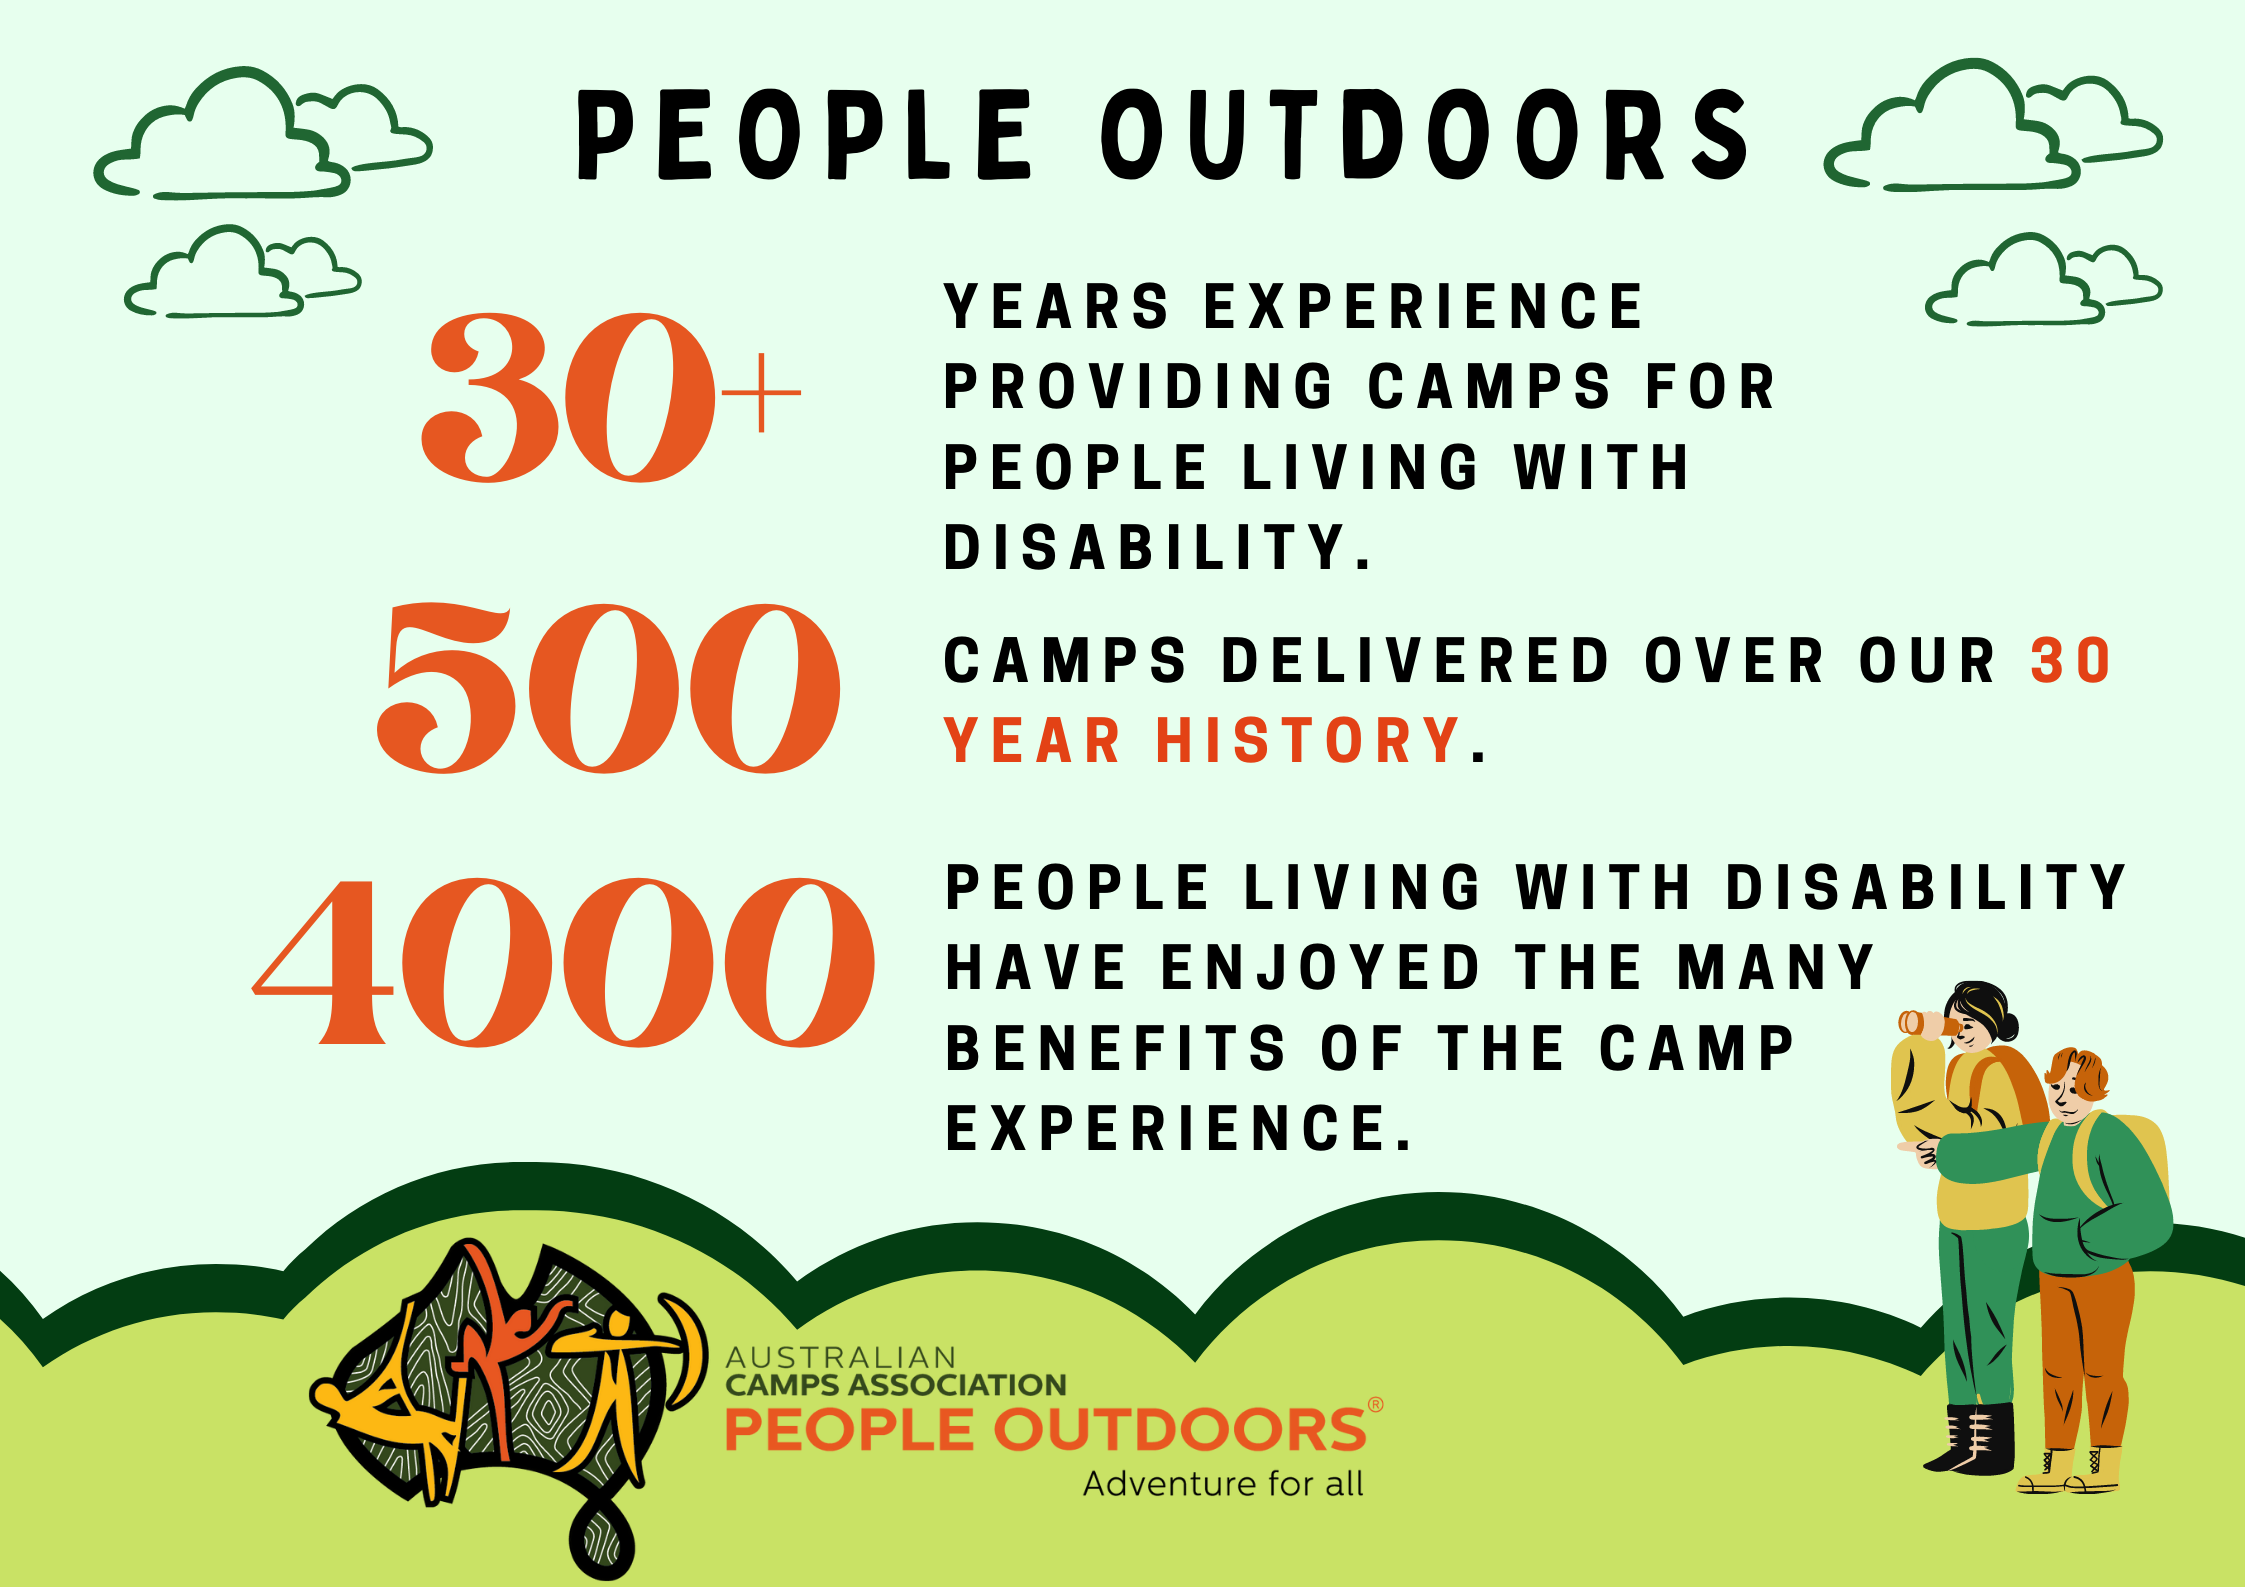 The infographic states 30+ Years experience providing camps for people living with disability. 500 Camps delivered over our 30 year history. 4,000 People living with disability have enjoyed the many benefits of the camp experience.